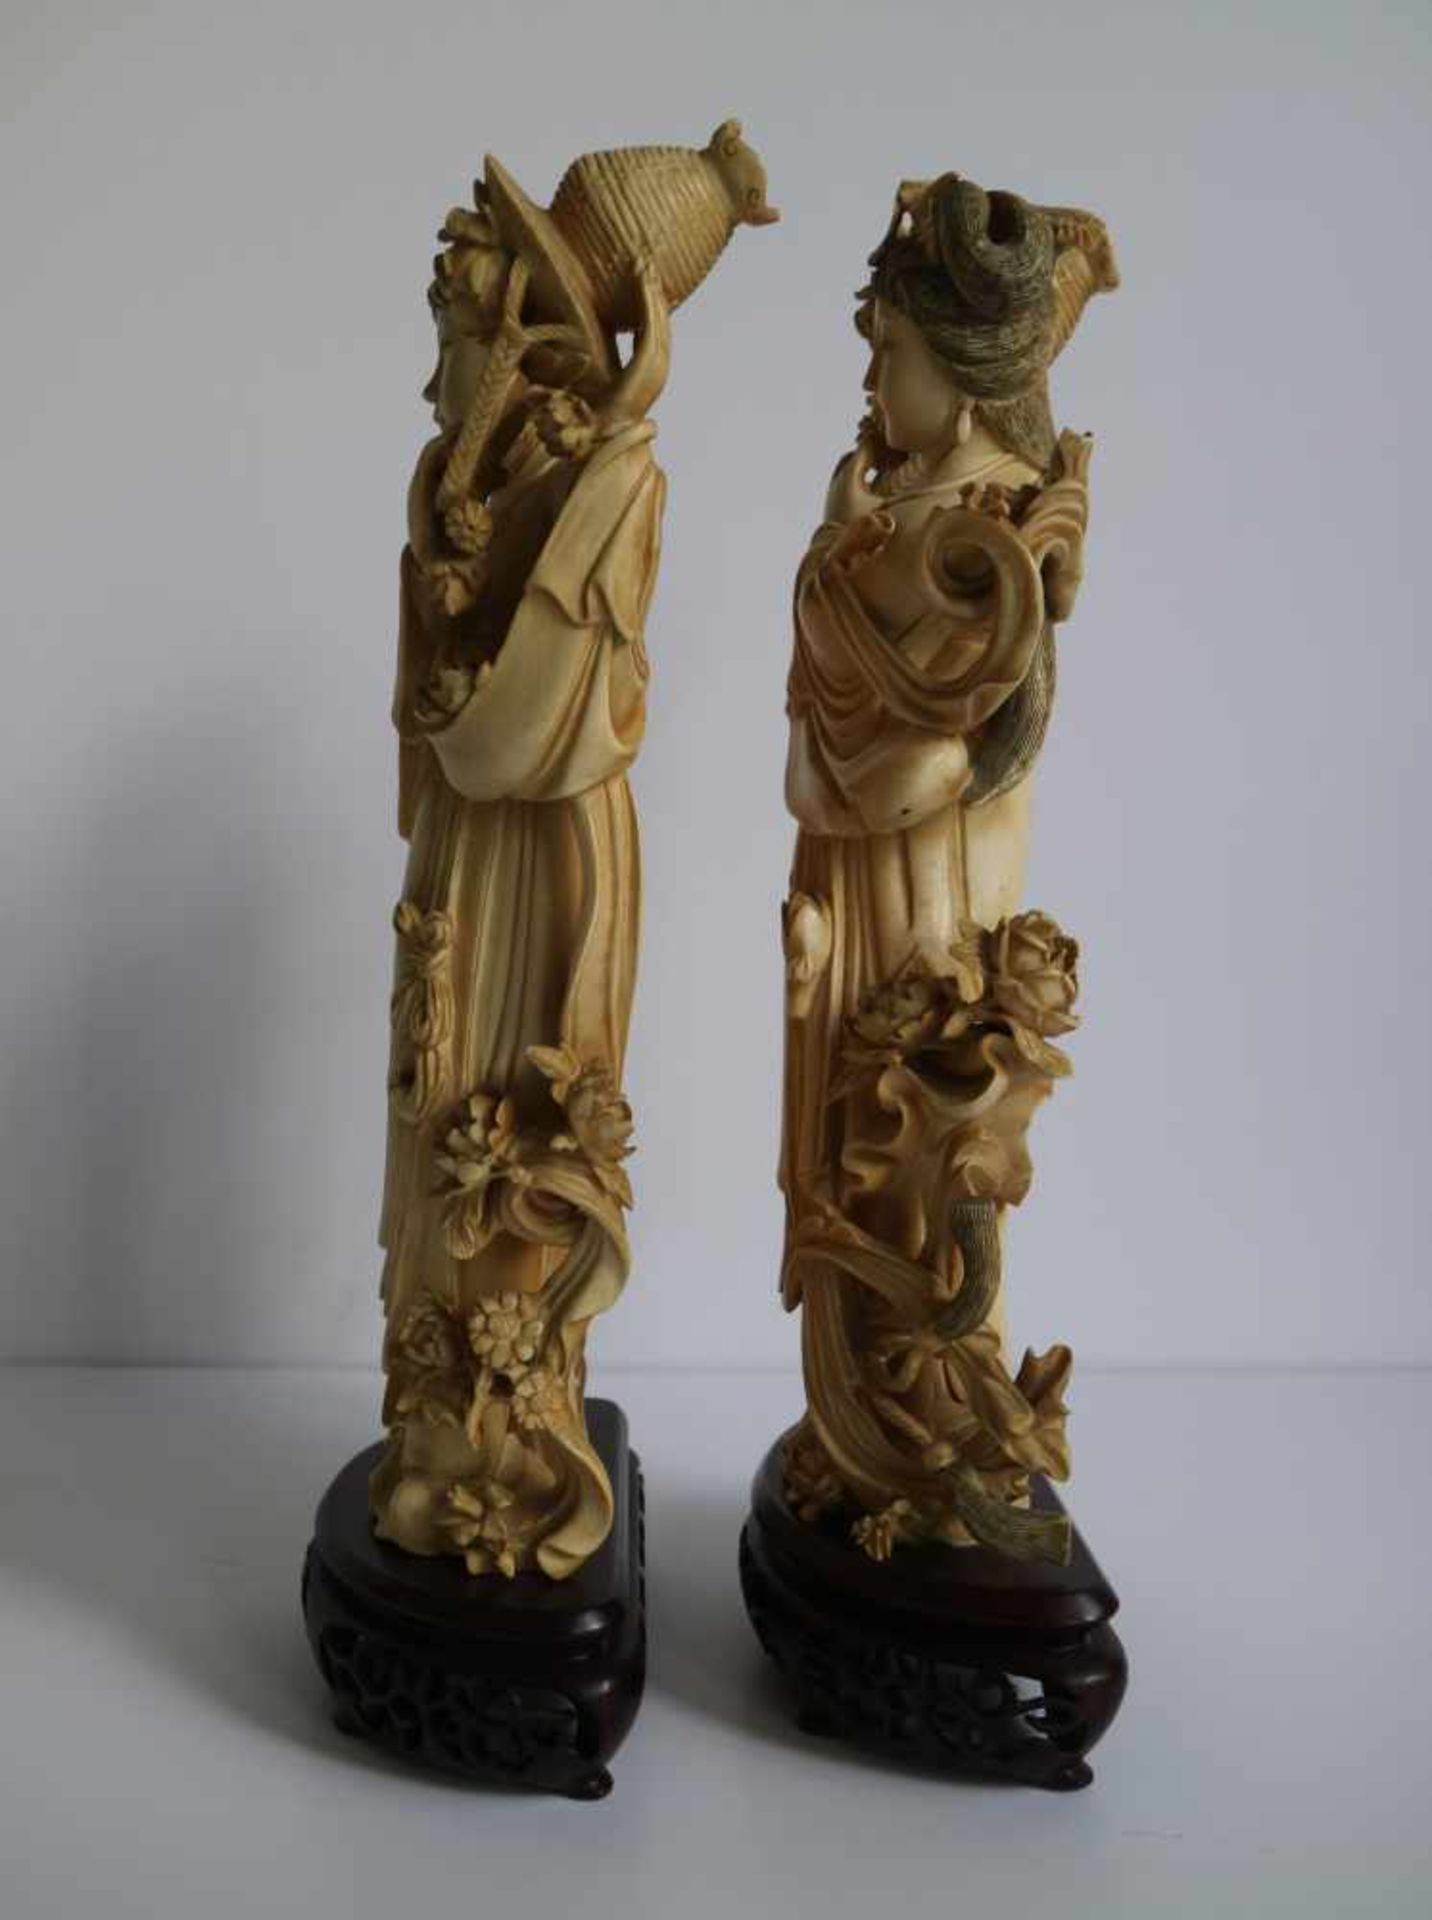 Ivory figures by He Xiangu with flowers symmetrically carved, China Republic period H 28,5 cm + 4,5 - Bild 4 aus 4